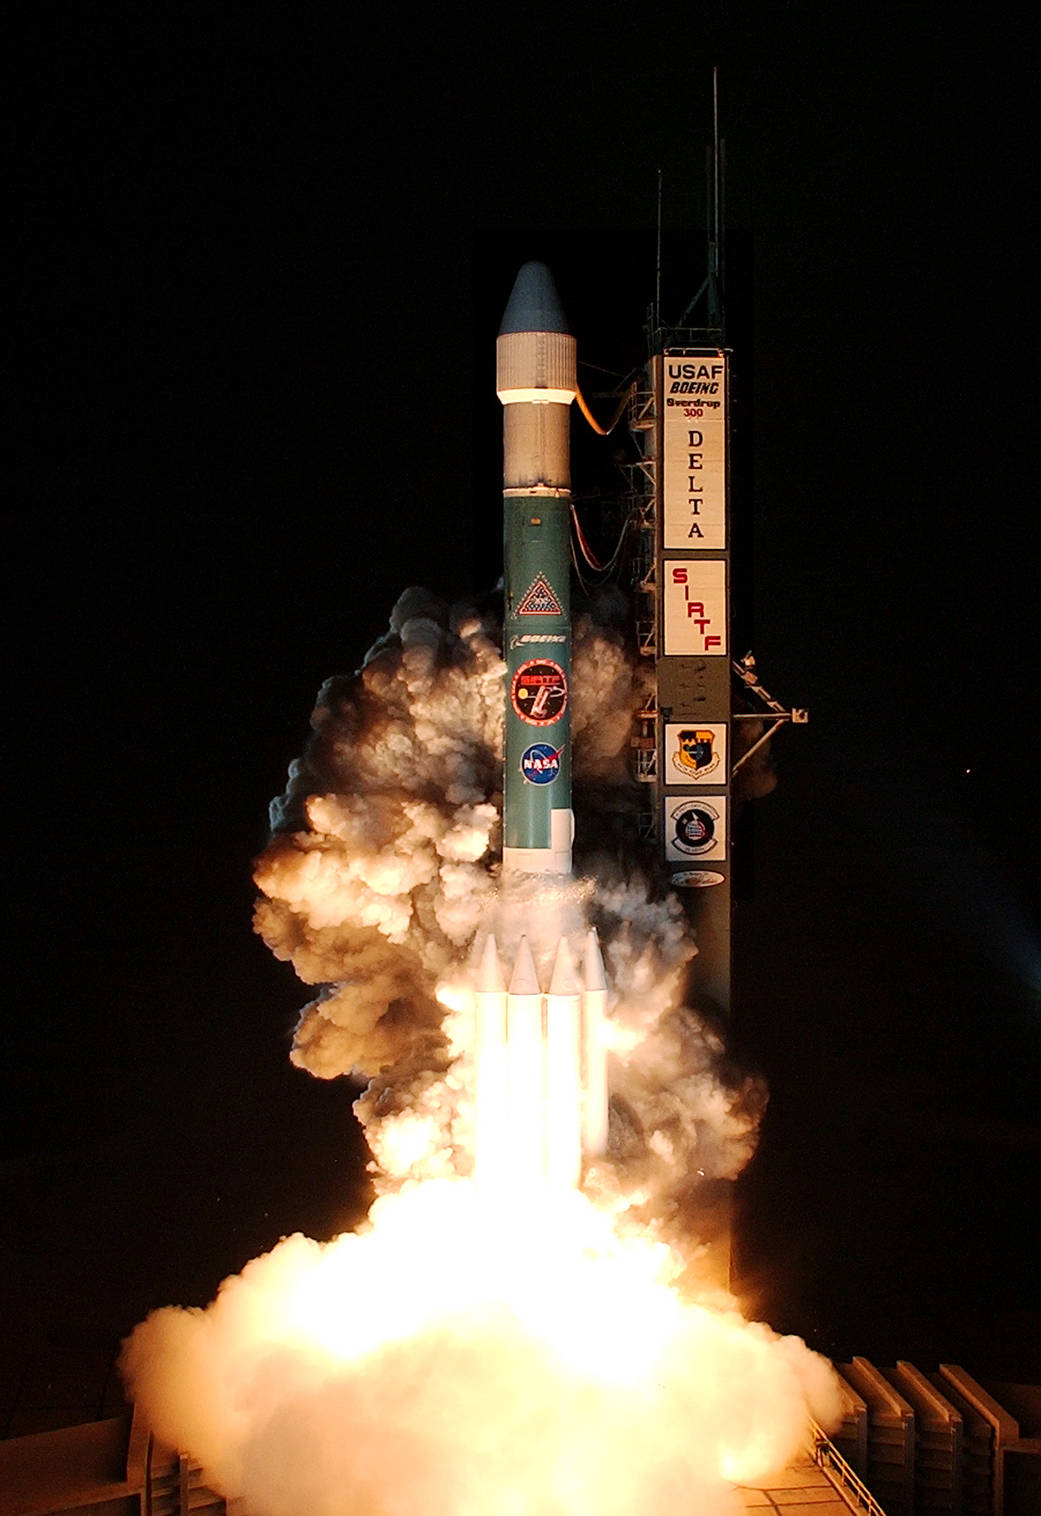 Closeup image of nighttime launch of blue and white rocket with decals for NASA, Boeing and space telescope